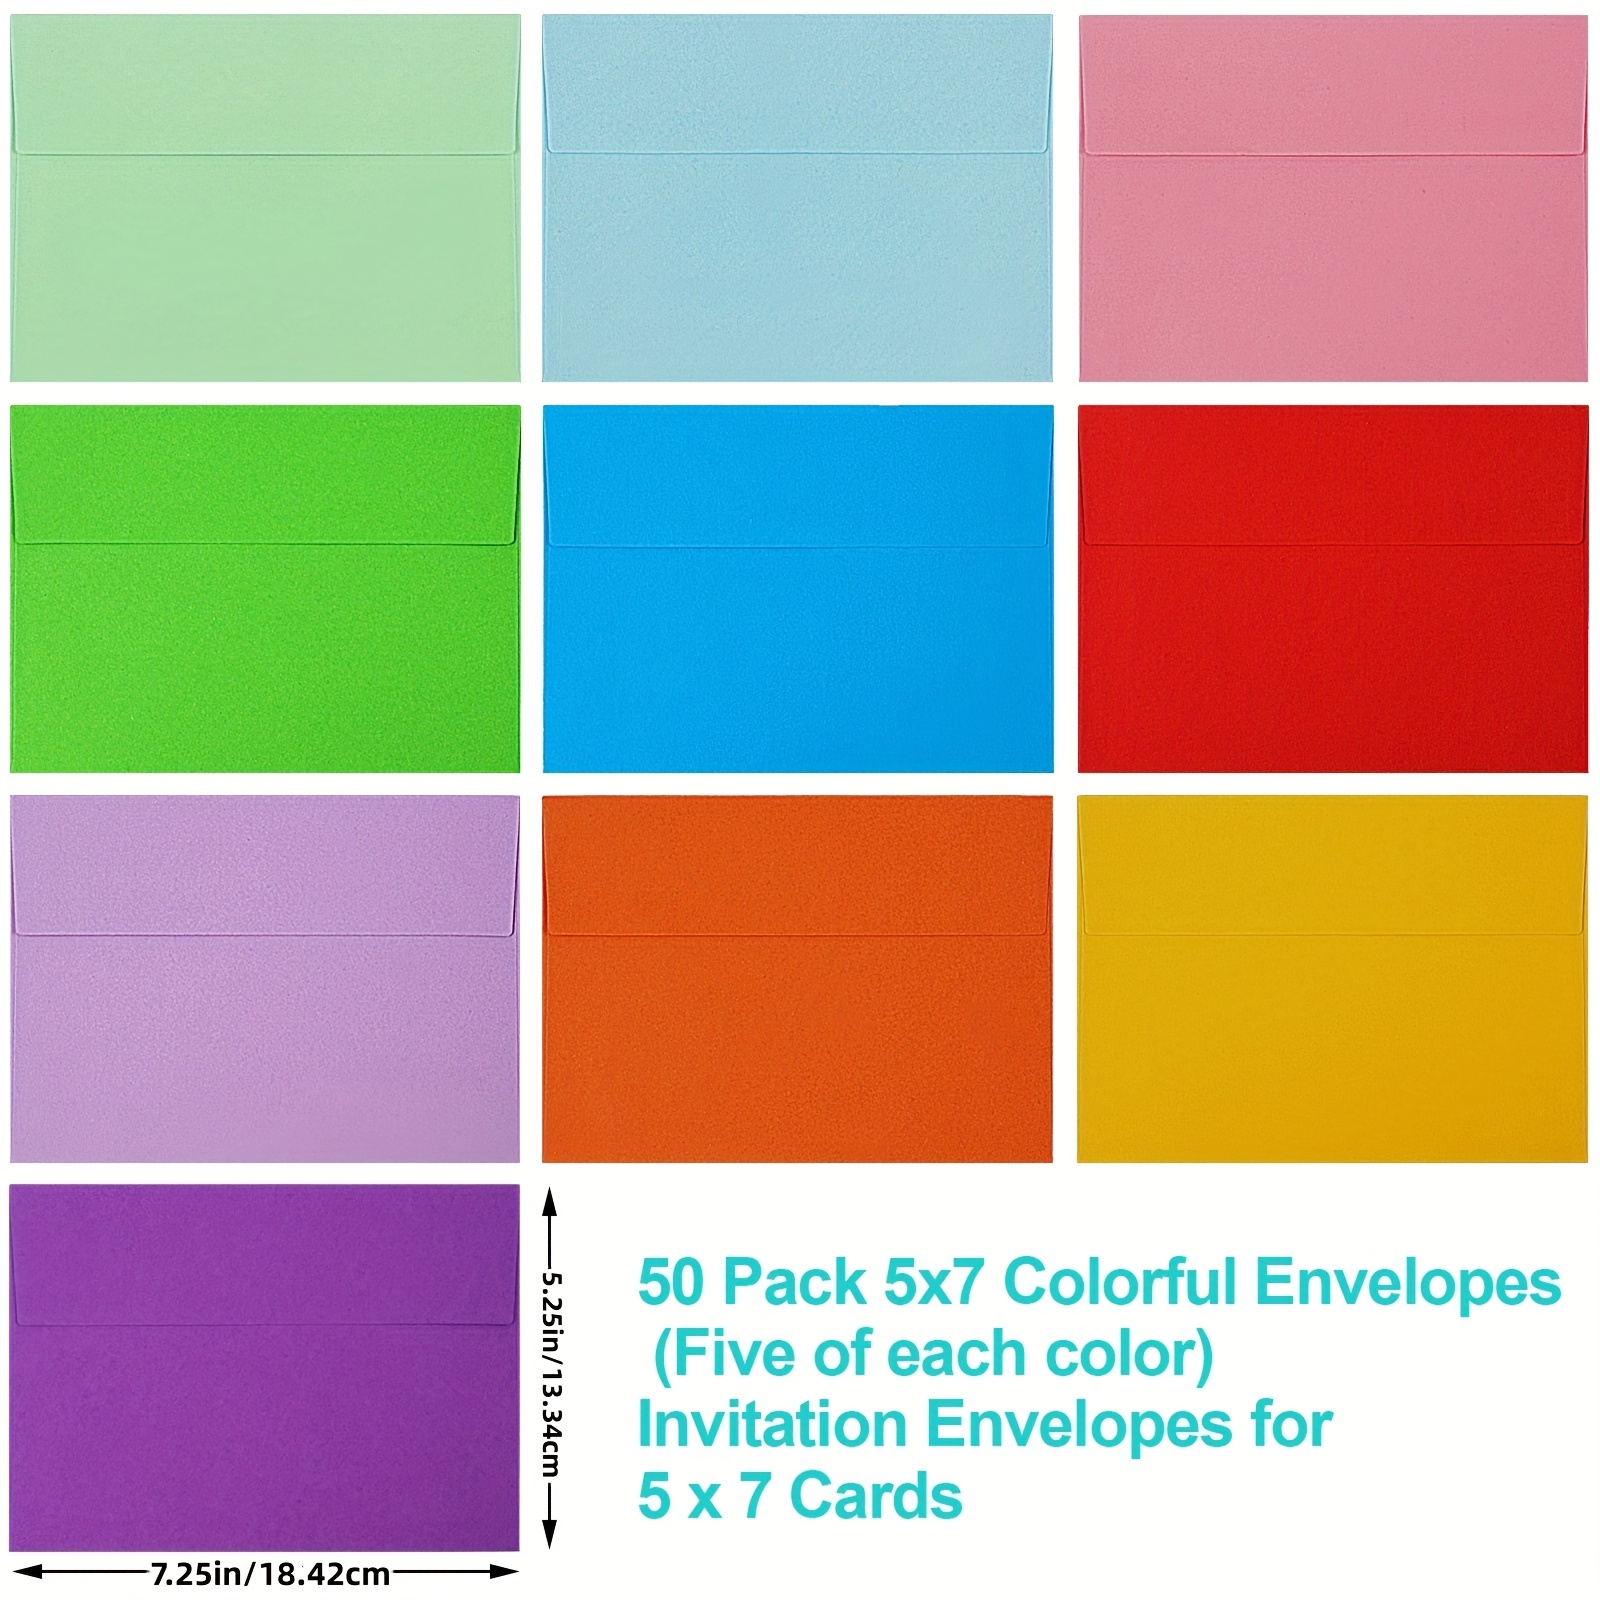 50 Packs 5x7 Envelopes, A7 Envelopes, 5x7 Envelopes For Invitations,  Printable Invitation Envelopes, Envelopes Self Seal For Weddings,  Invitations, Photos, Greeting Cards, Mailing